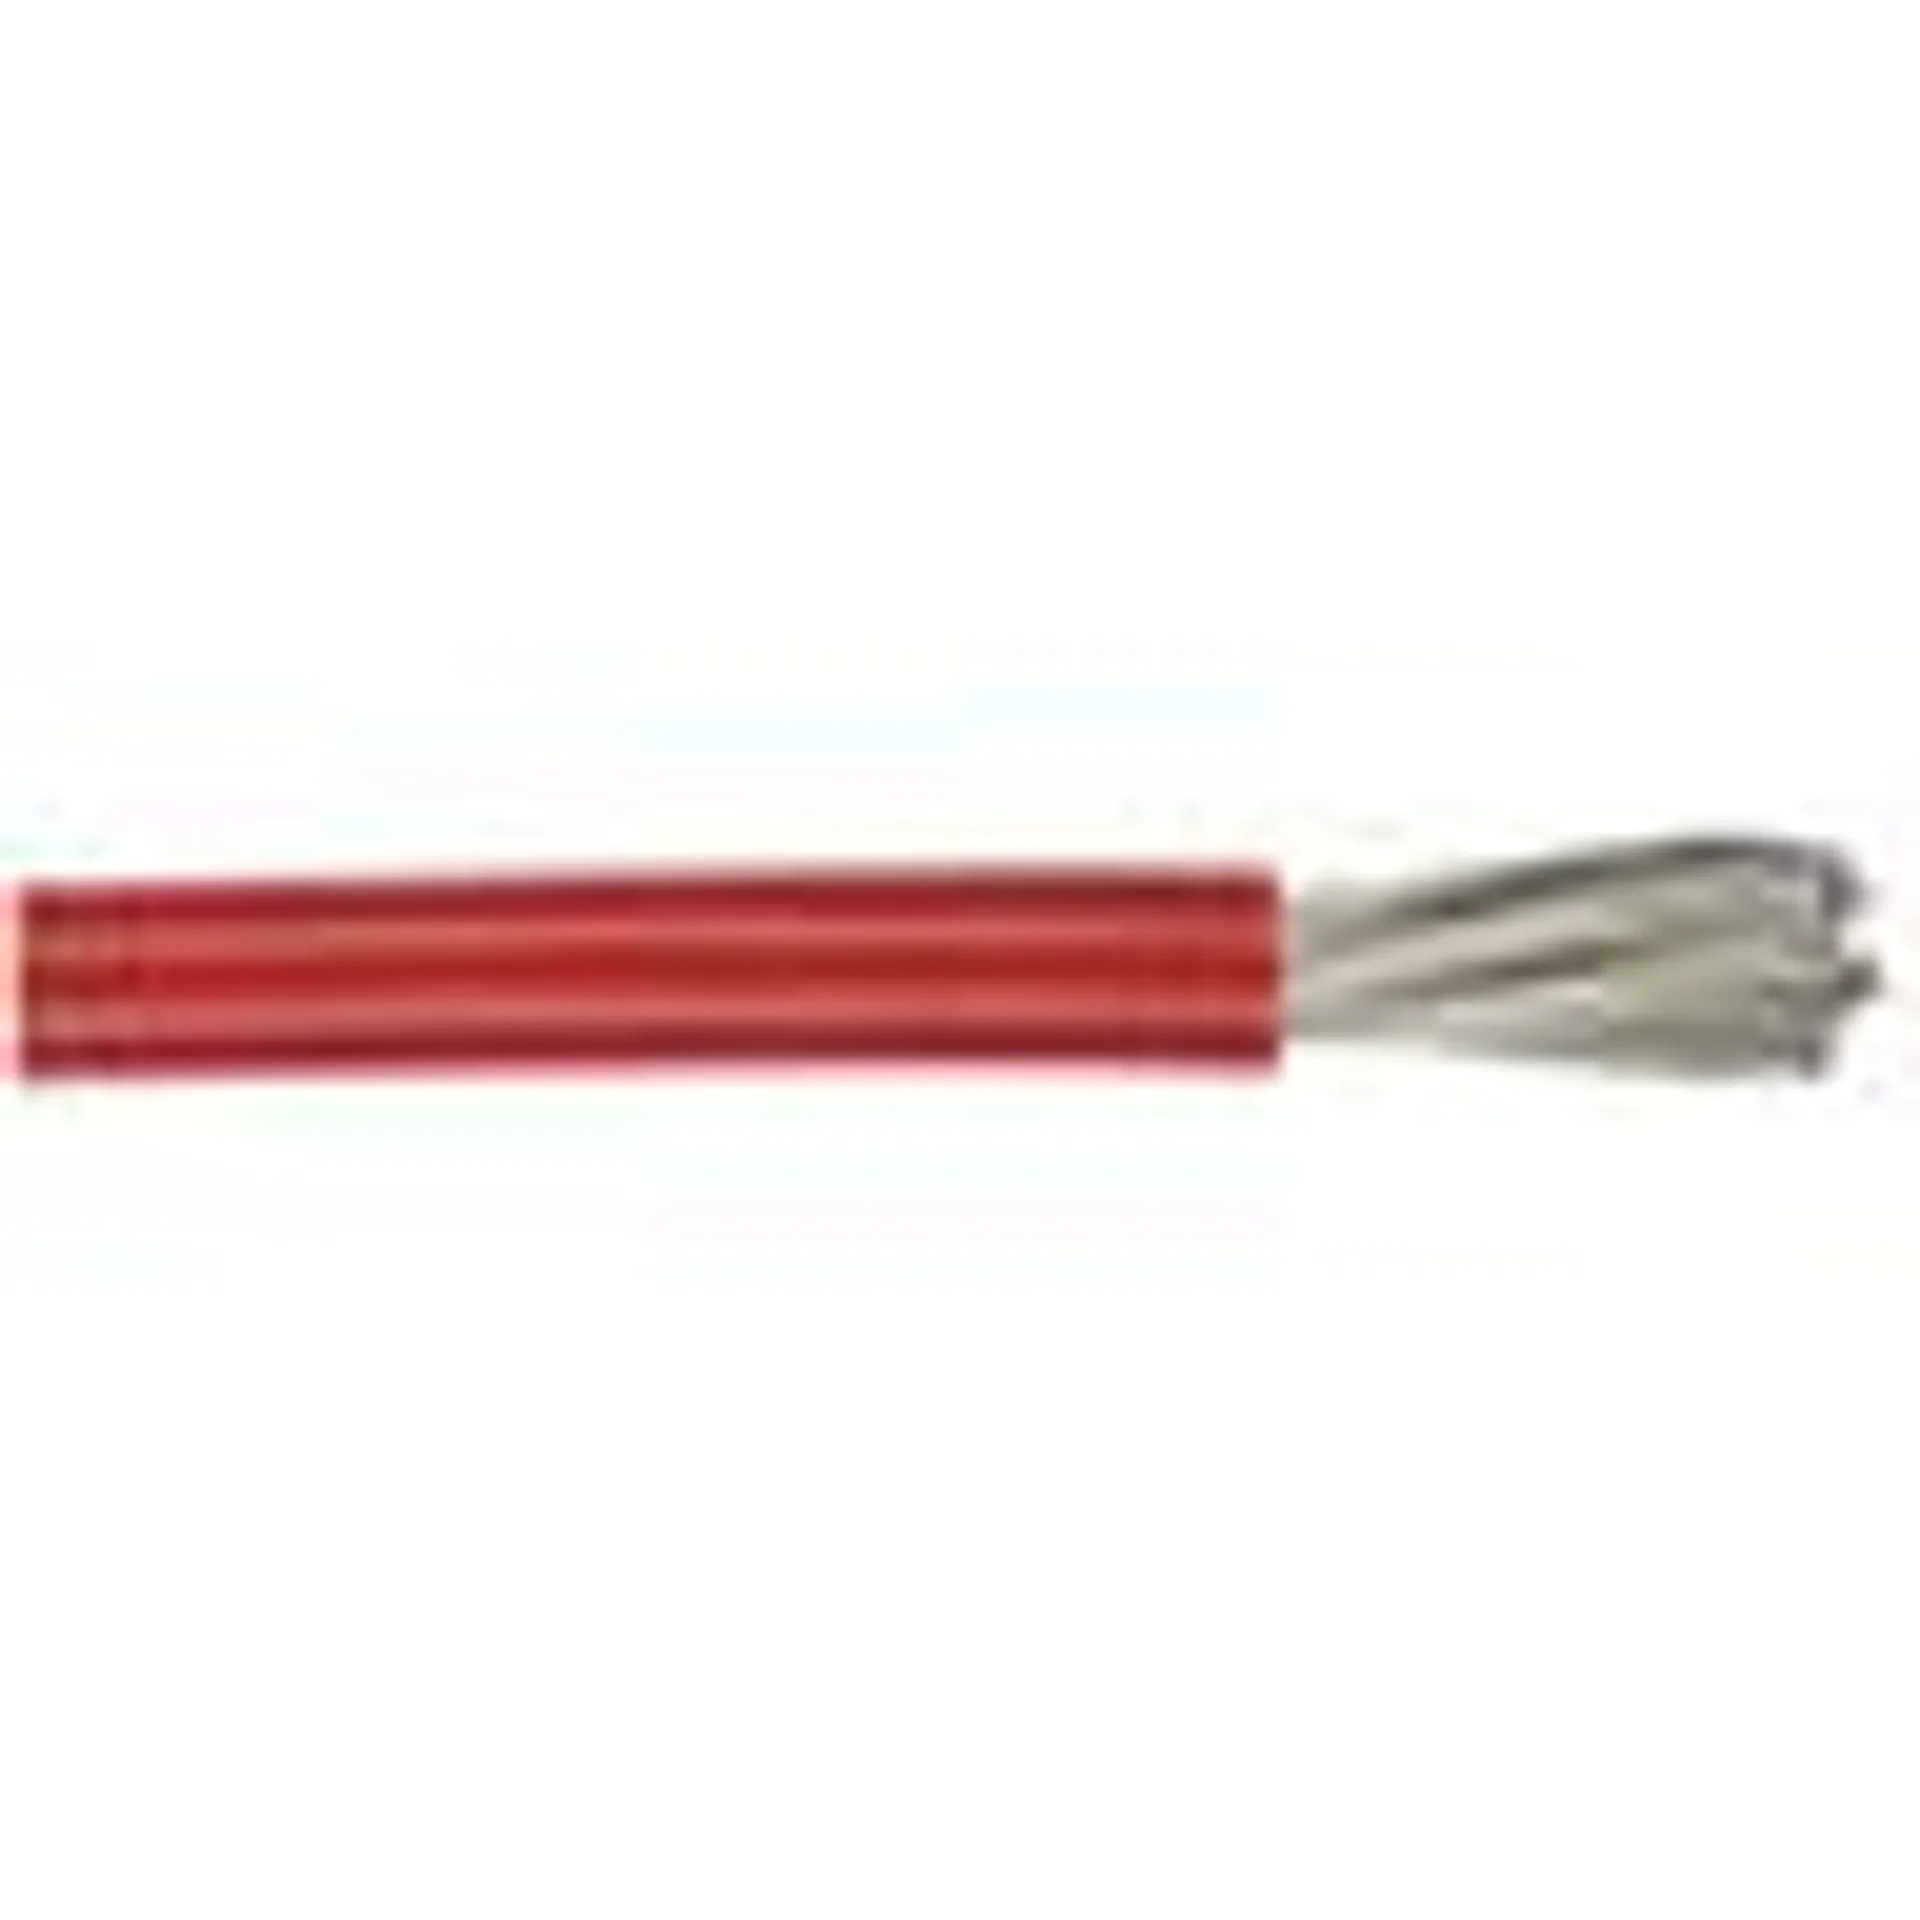 RED 4GA OFC Super High Current Power Cable - Sold per metre